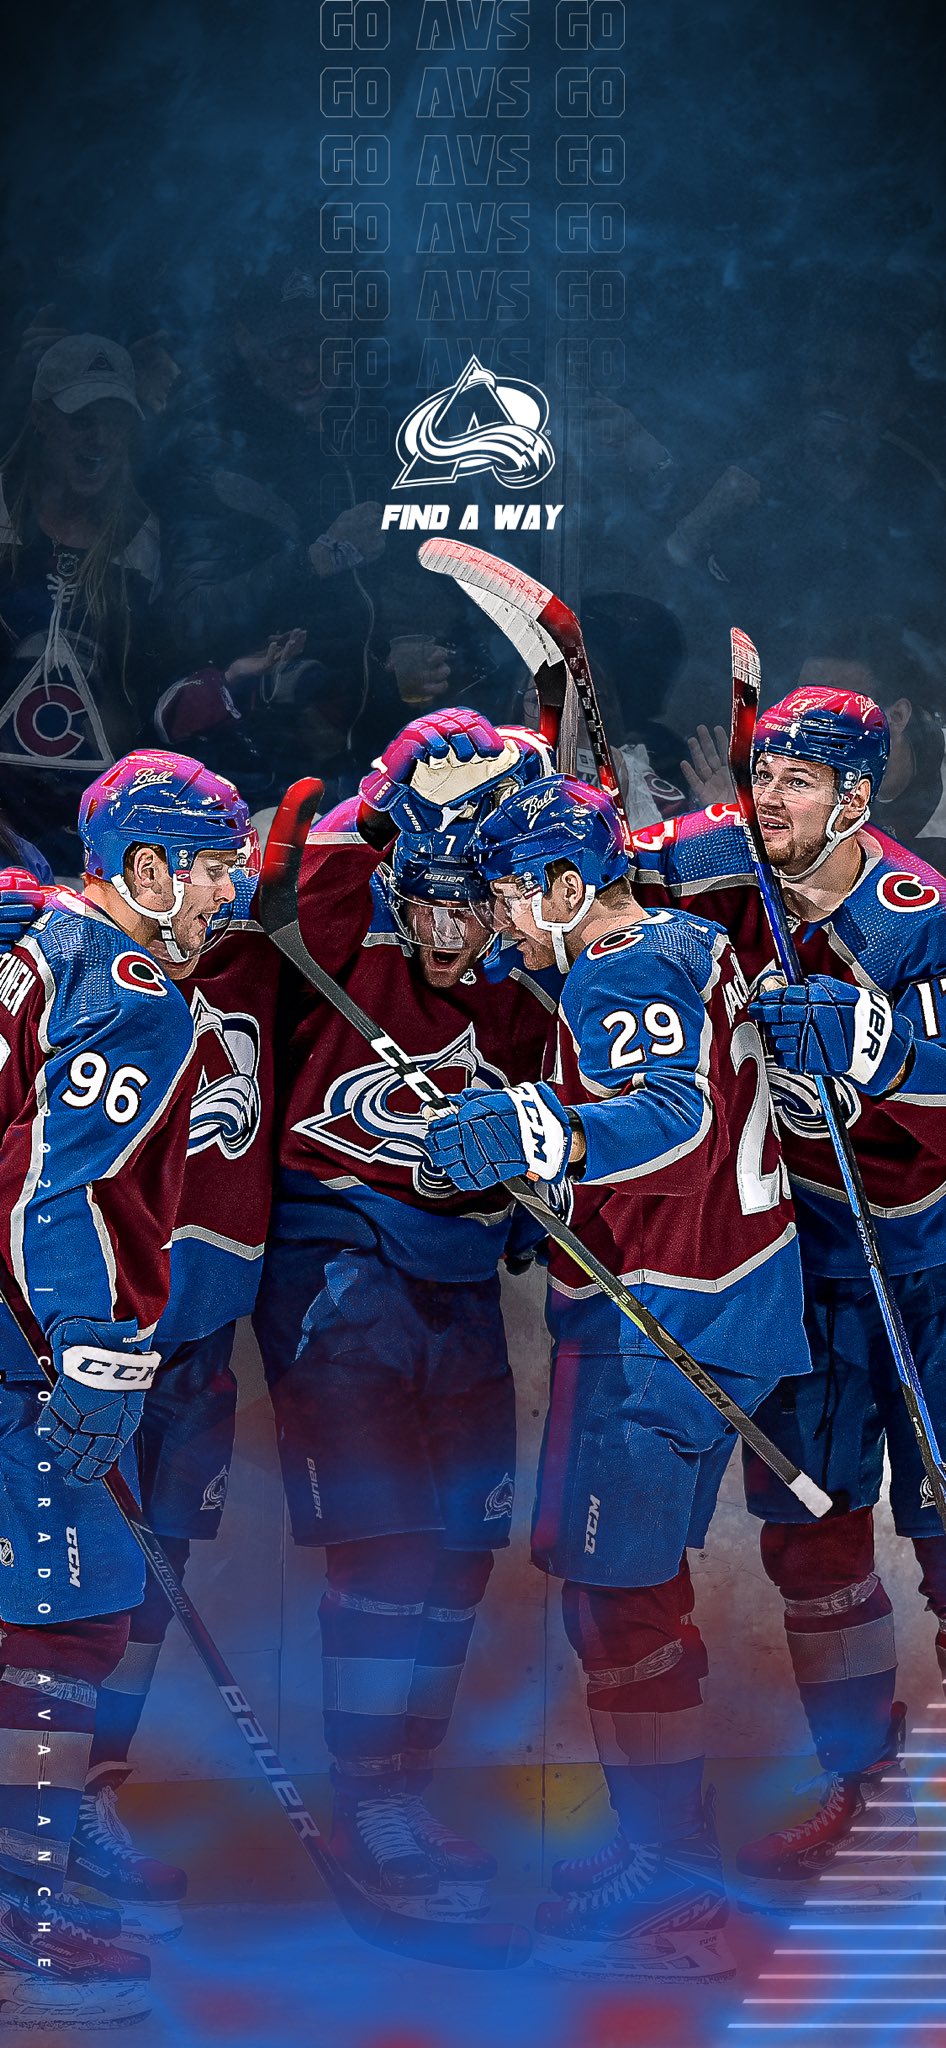 Fresh looks for this Wallpaper Wednesday! - Colorado Avalanche